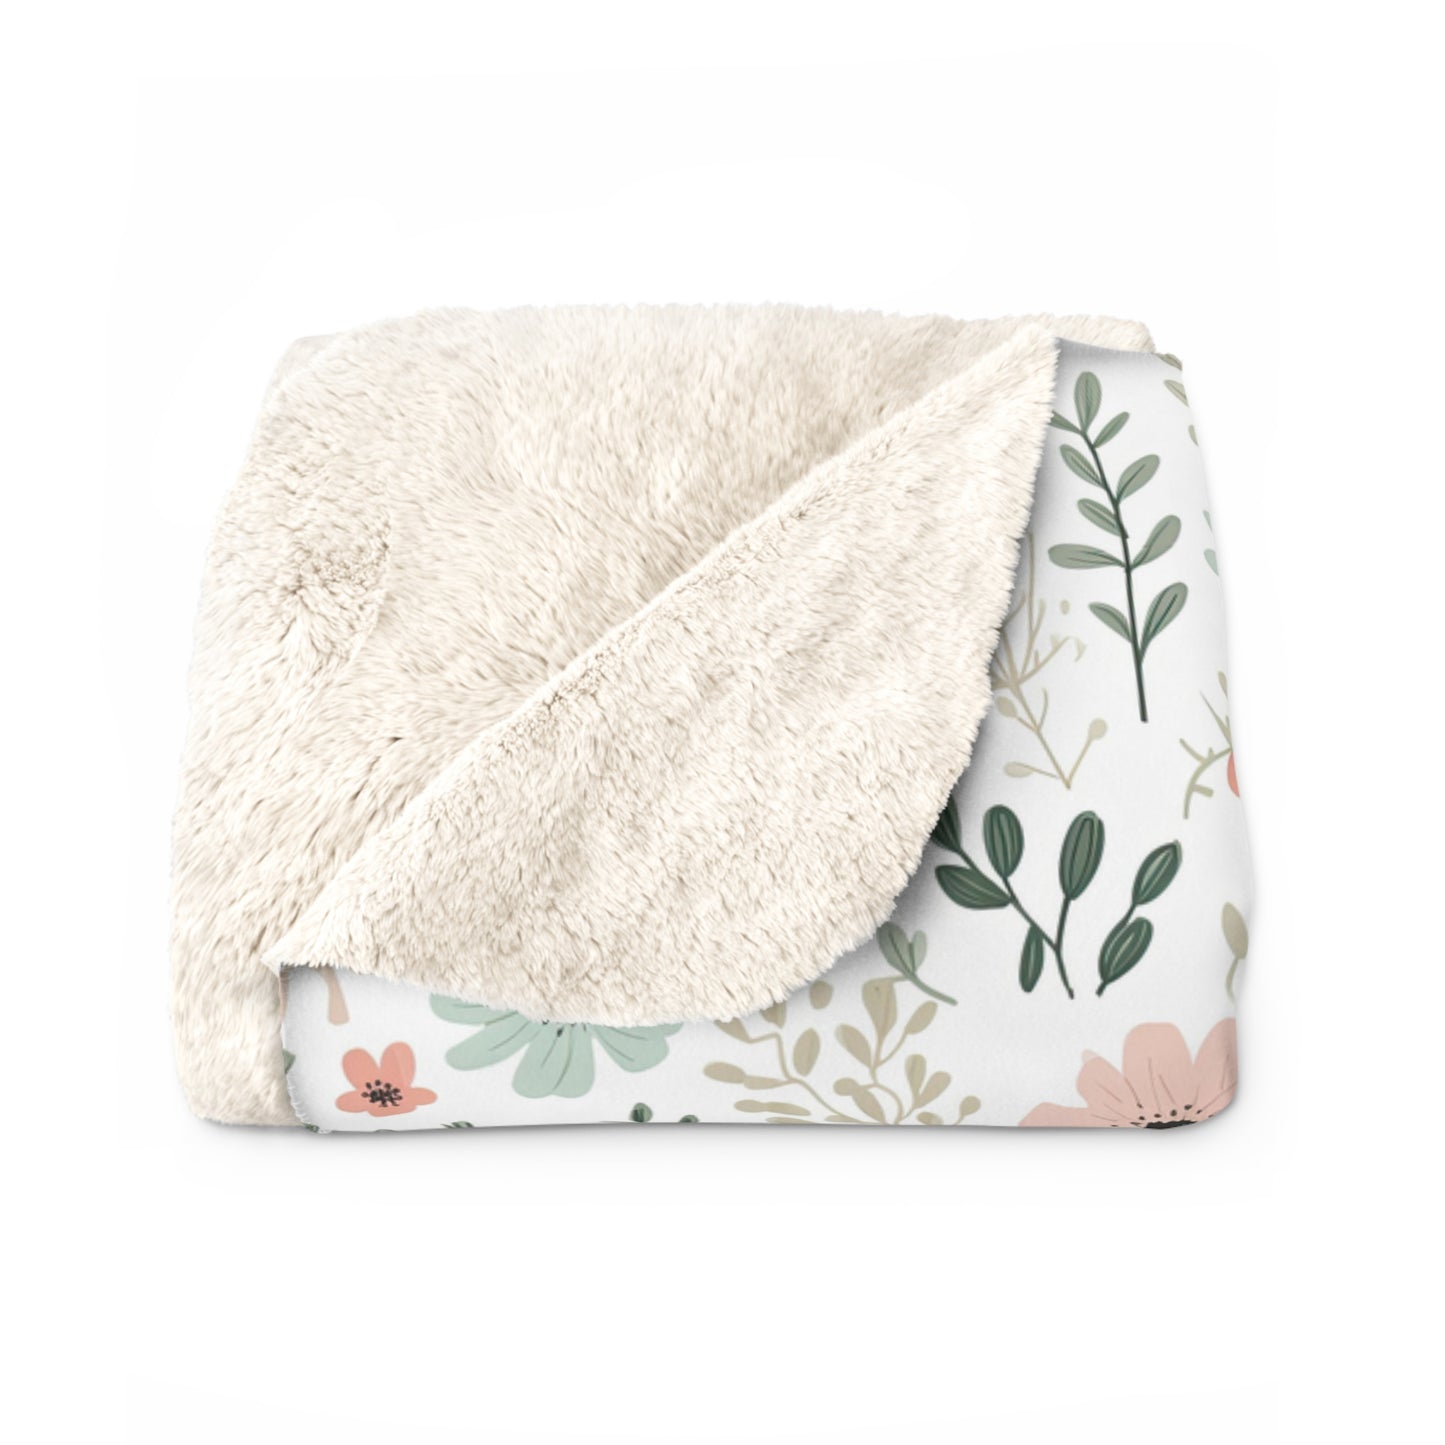 Blue and Blush Pink Floral Sherpa Blanket - Blush Pink and Blue Floral Blanket